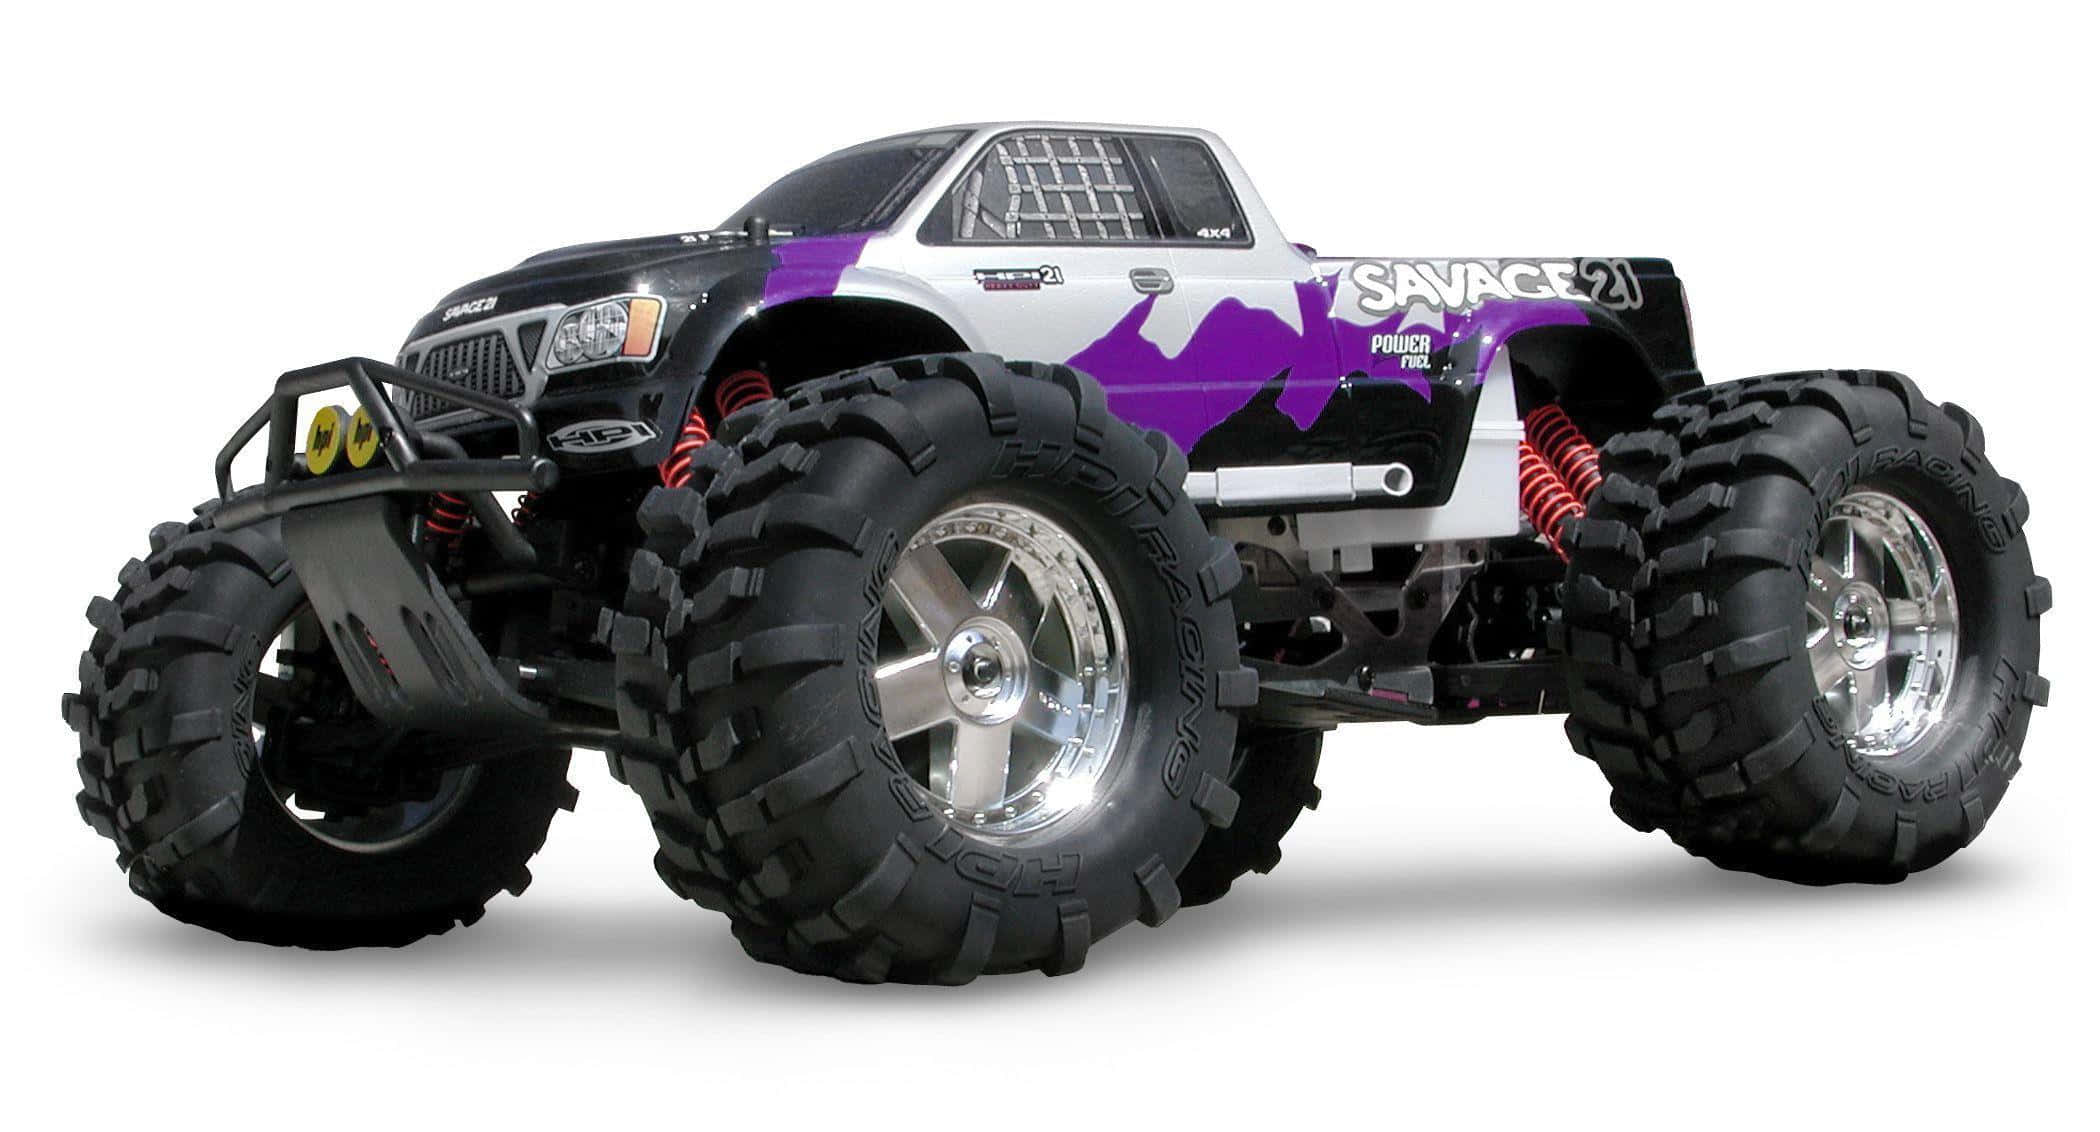 A Purple And White Monster Truck On A White Background